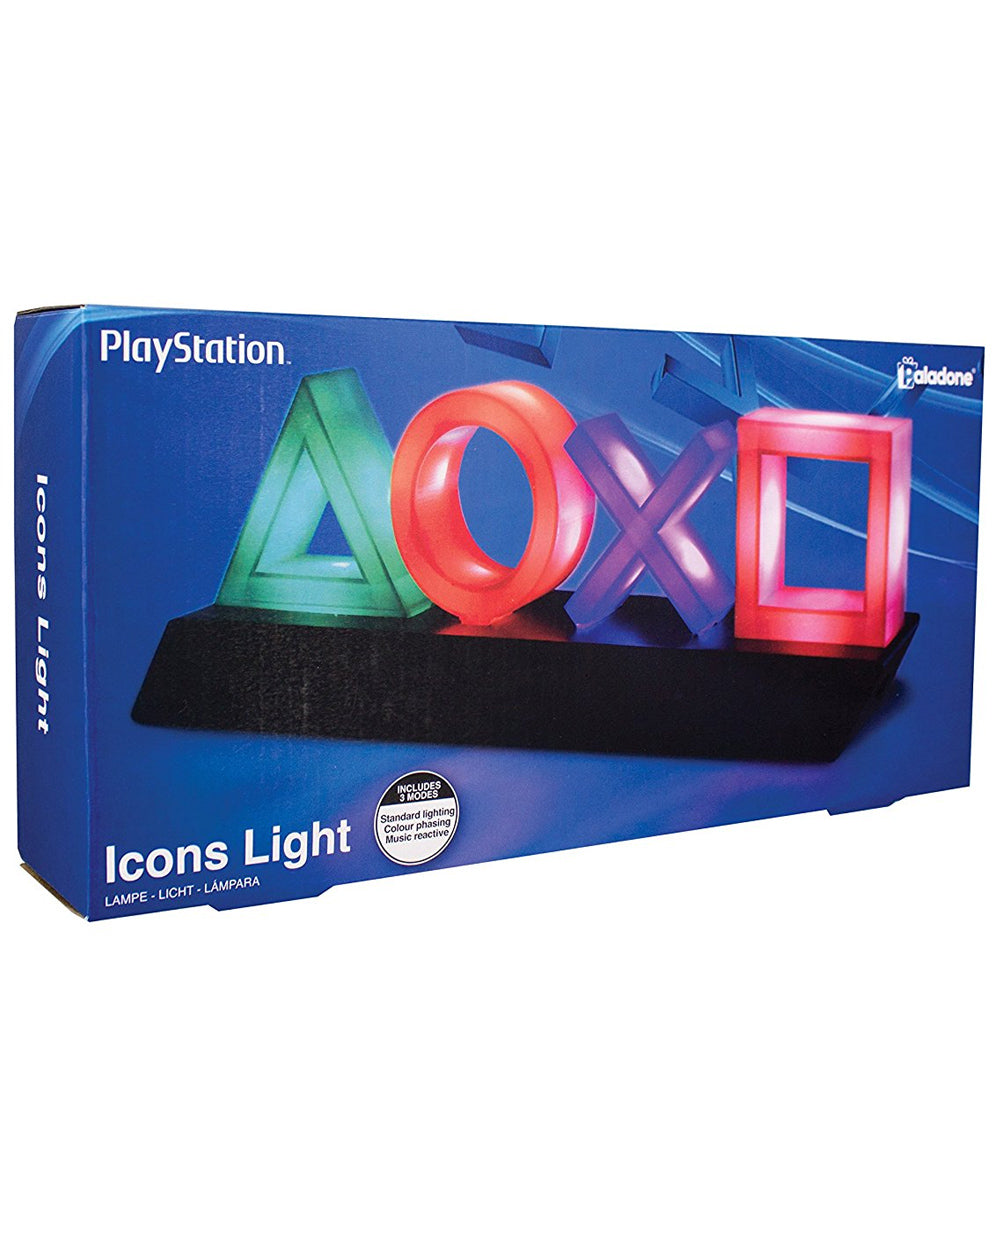 PLAYSTATION ICONS LIGHT.